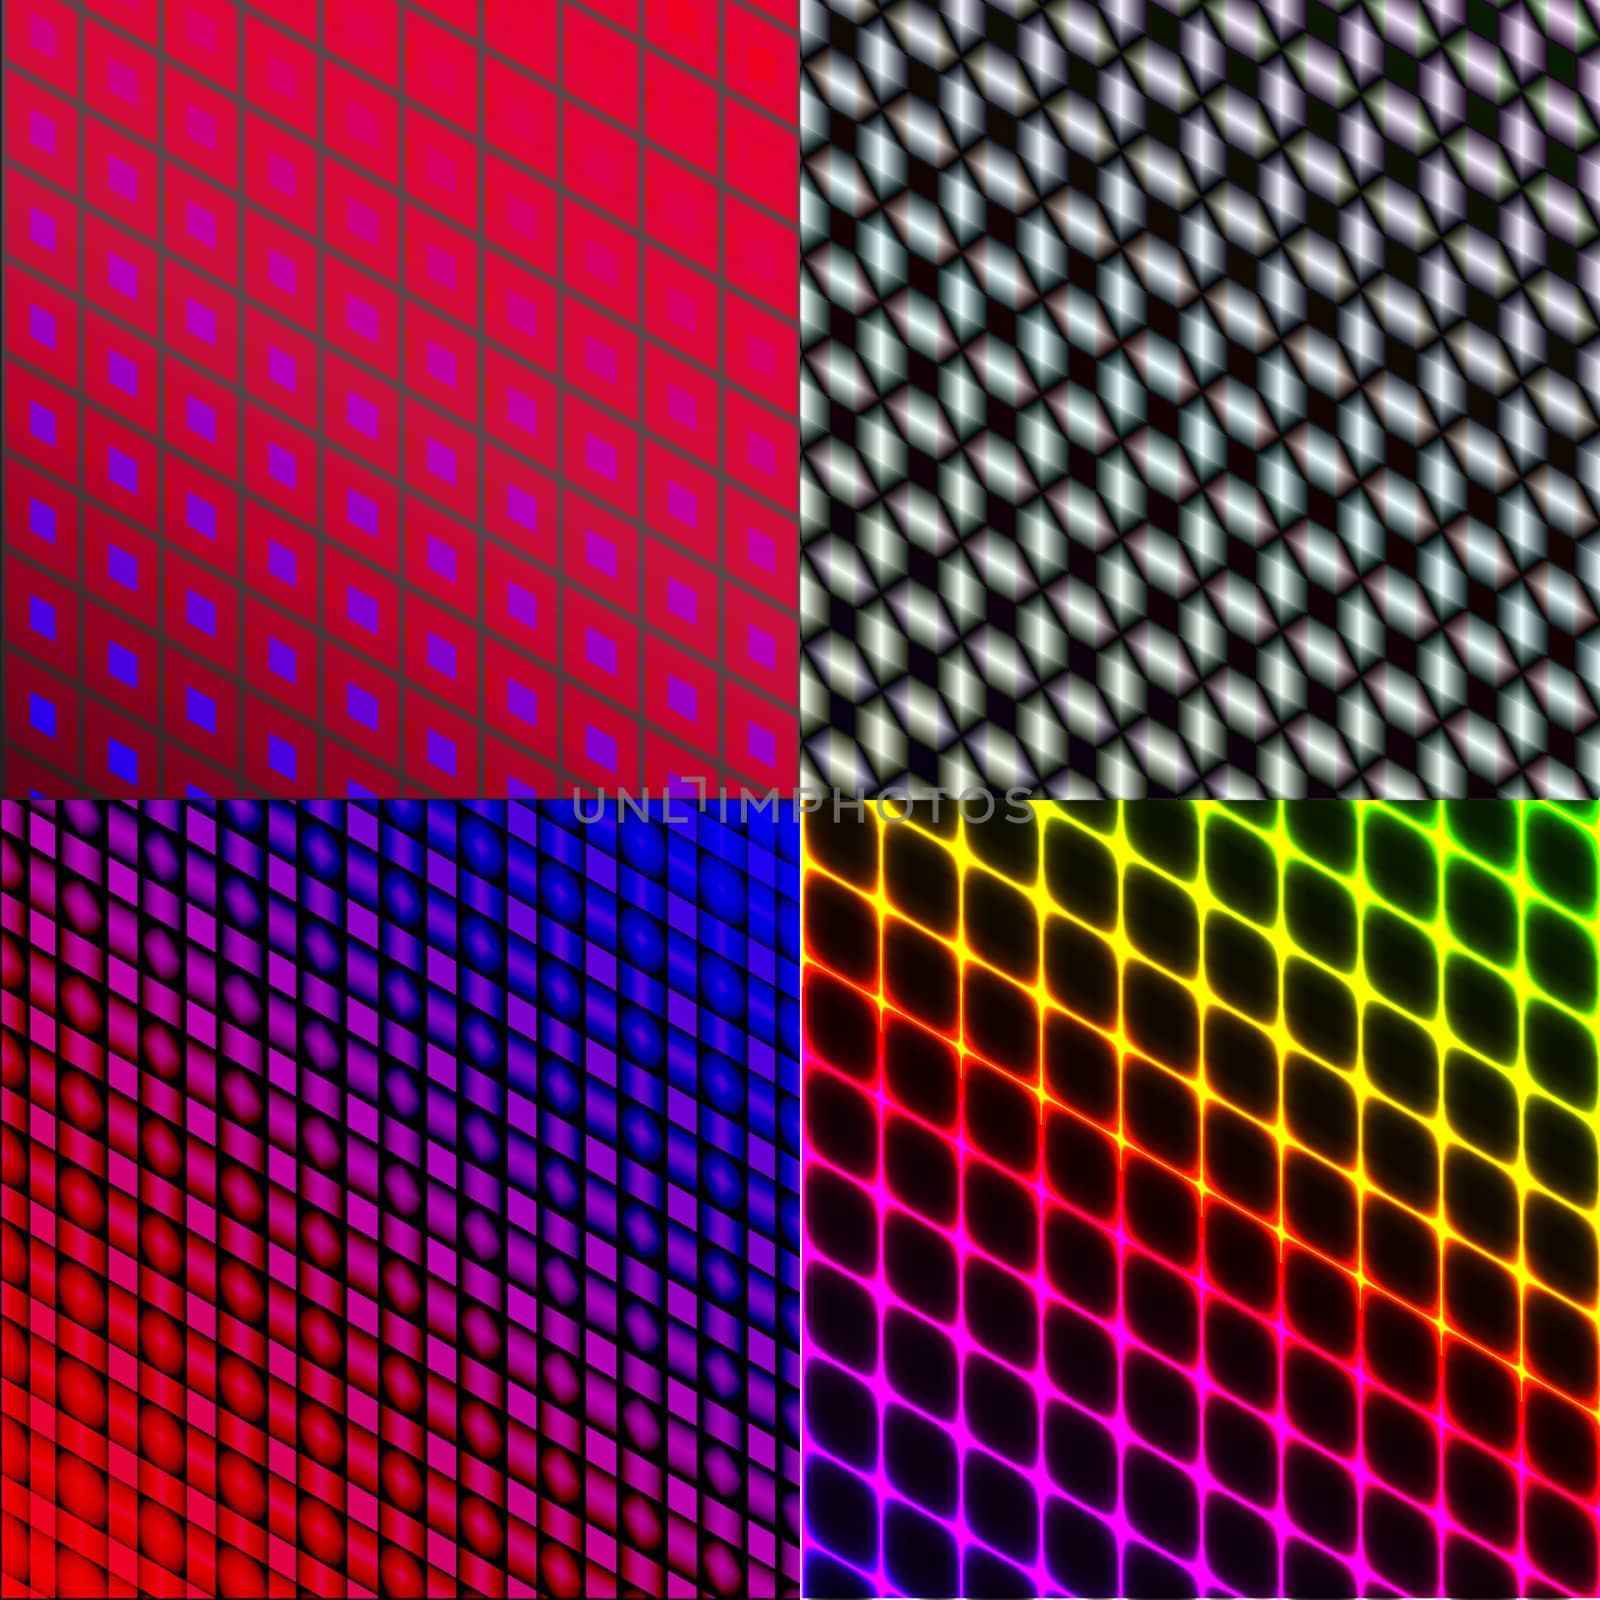 Set of 4 colorful abstract neon backgrounds. Rasterized copy by serhii_lohvyniuk